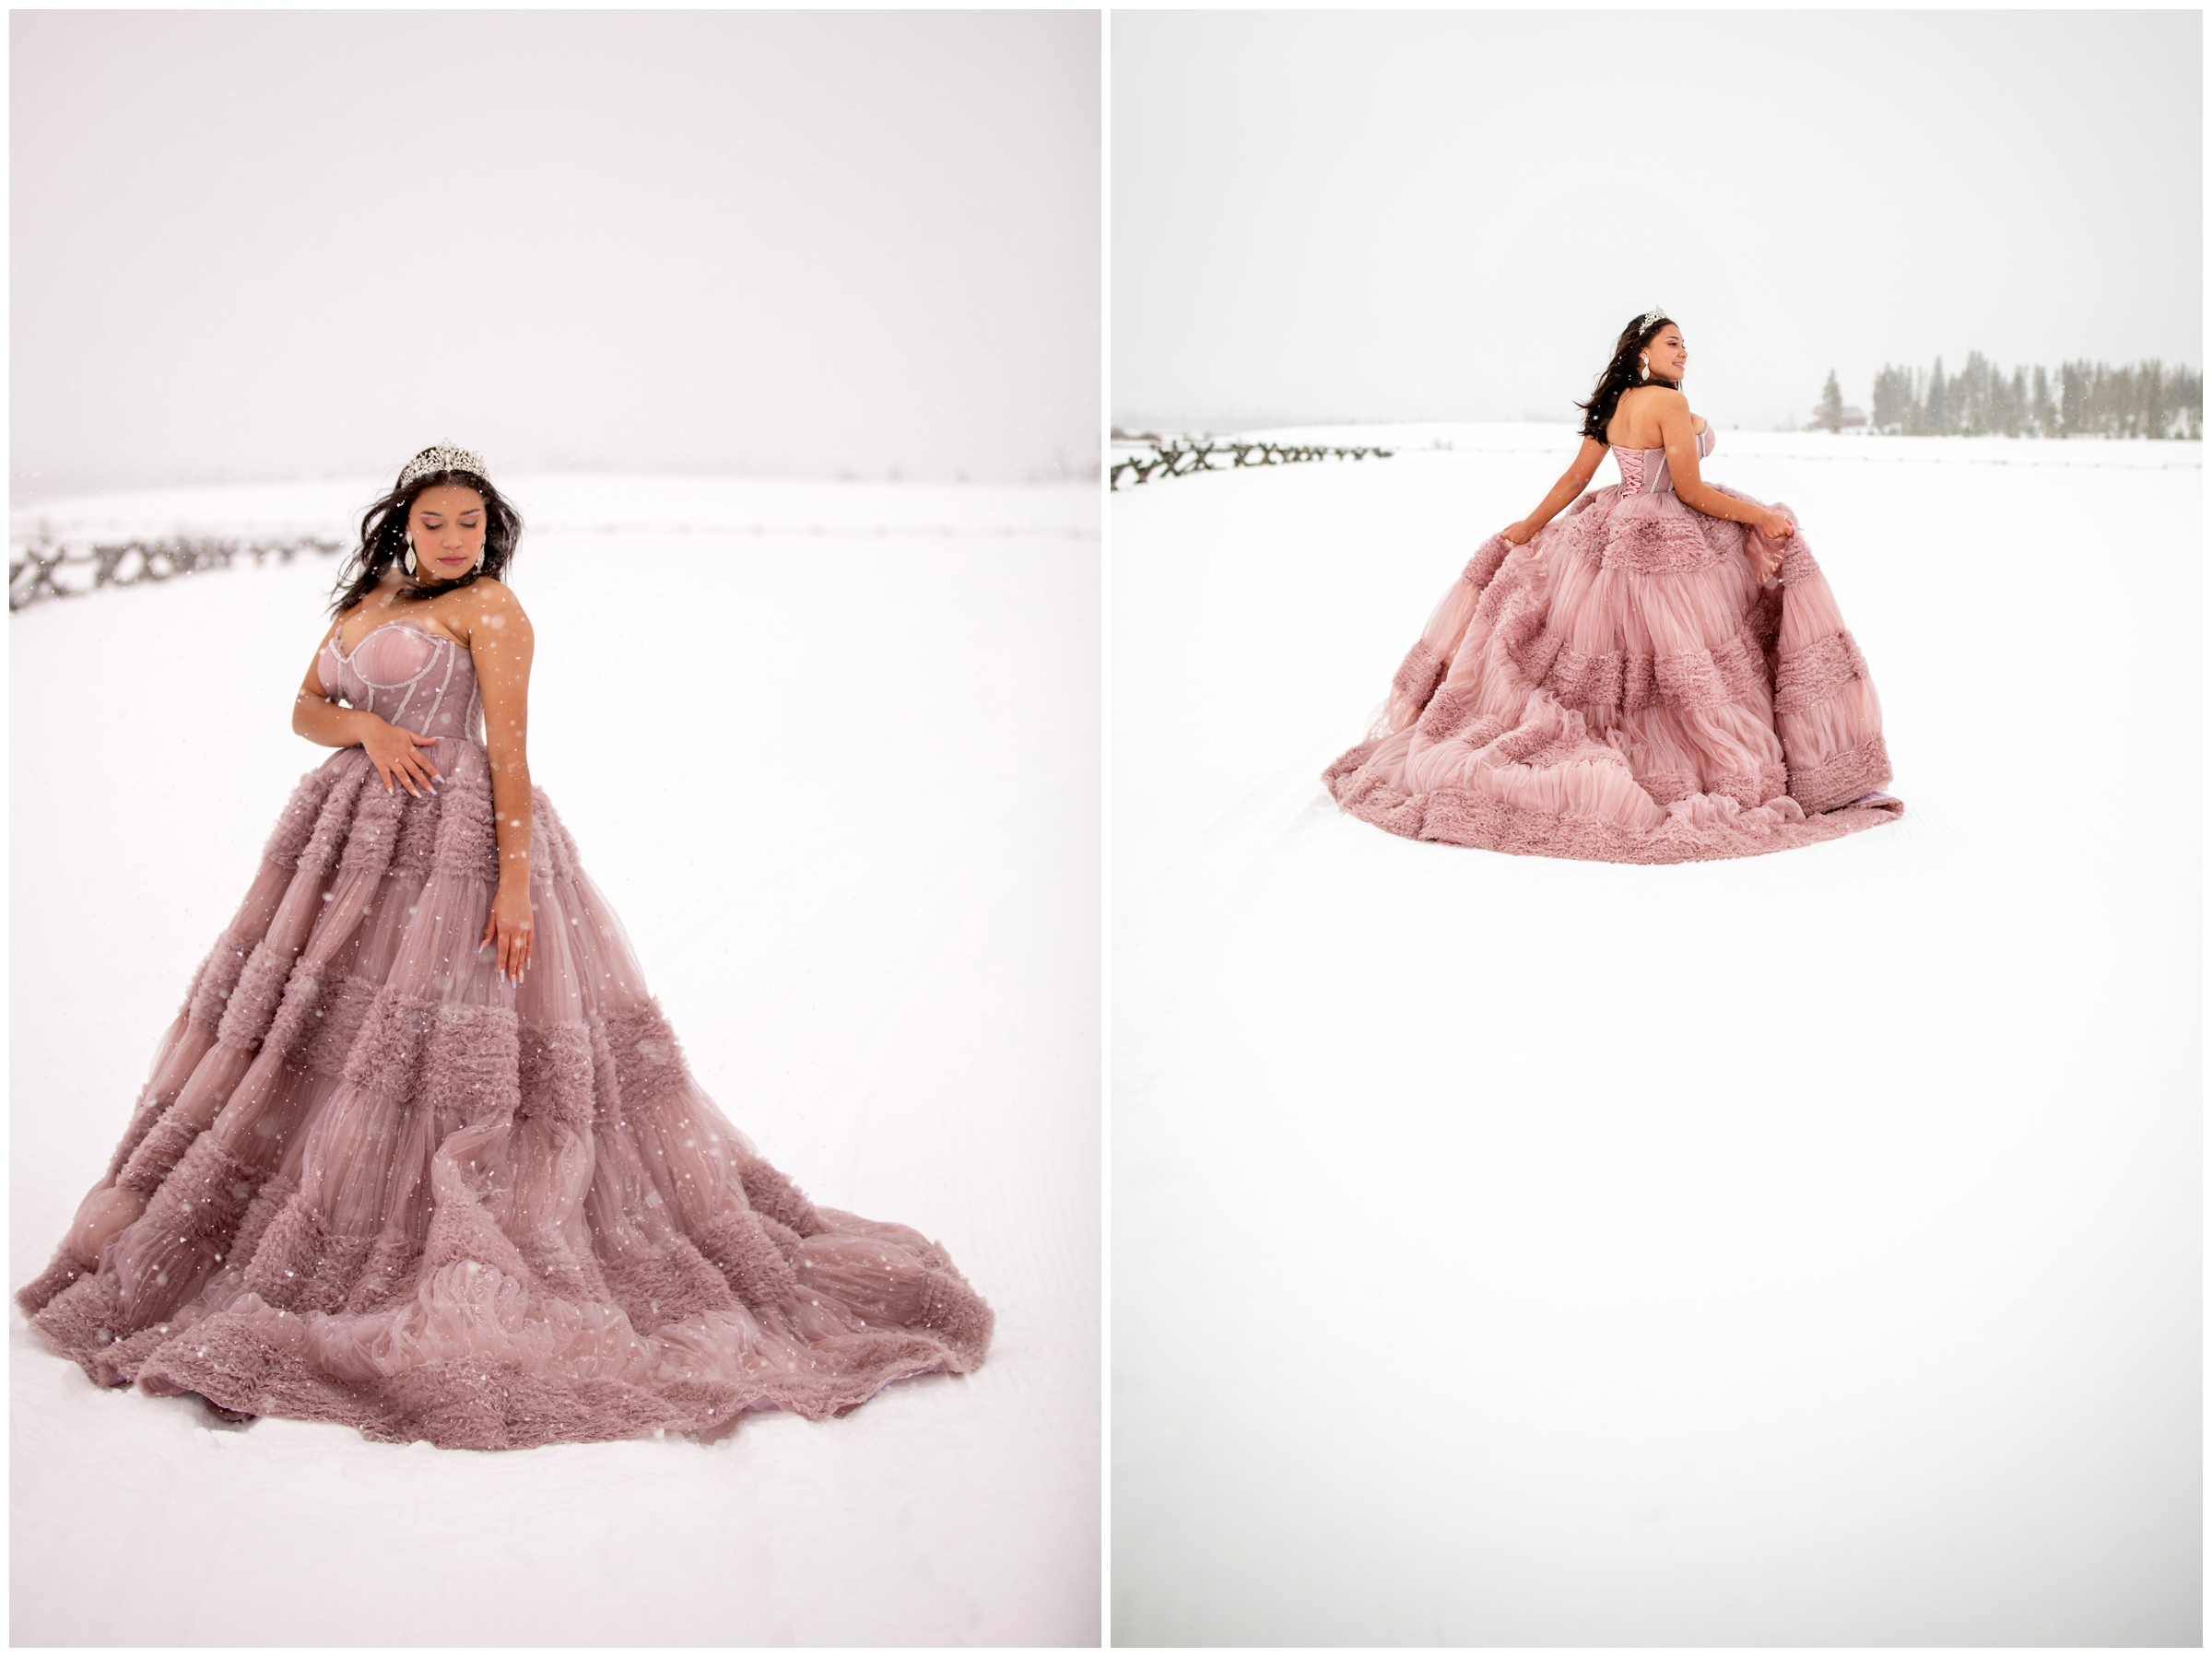 teen walking through the snow in a ballgown during Colorado quinceañera photoshoot at Devil's Thumb Ranch by Winter Park photographer Plum Pretty Photography